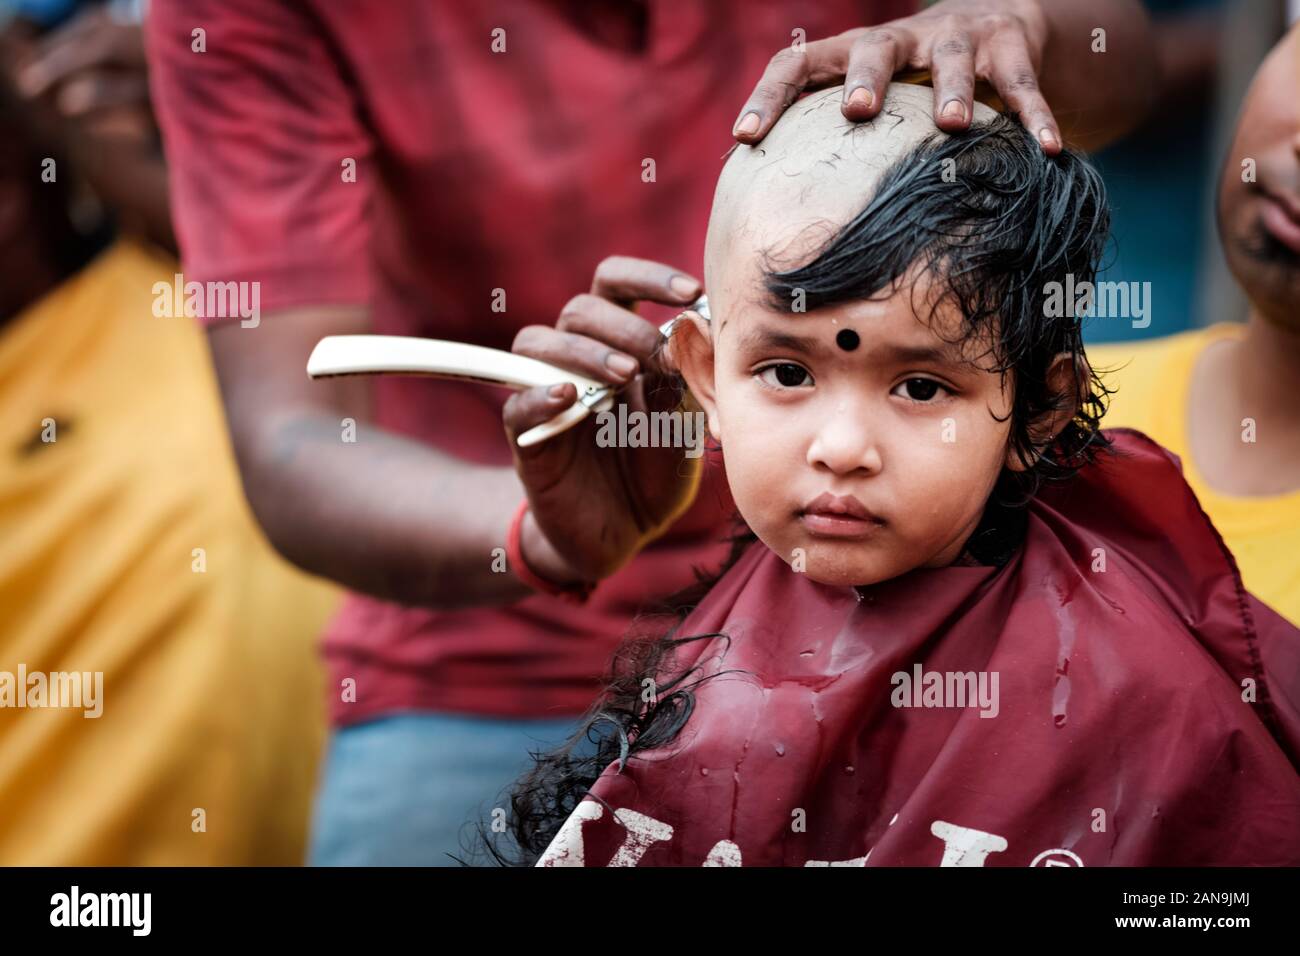 Batu Caves, Malaysia - January 21 2019 : Close-up of baby boy devotee getting tonsured or head shaving ritual in Thaipusam Festival. Stock Photo